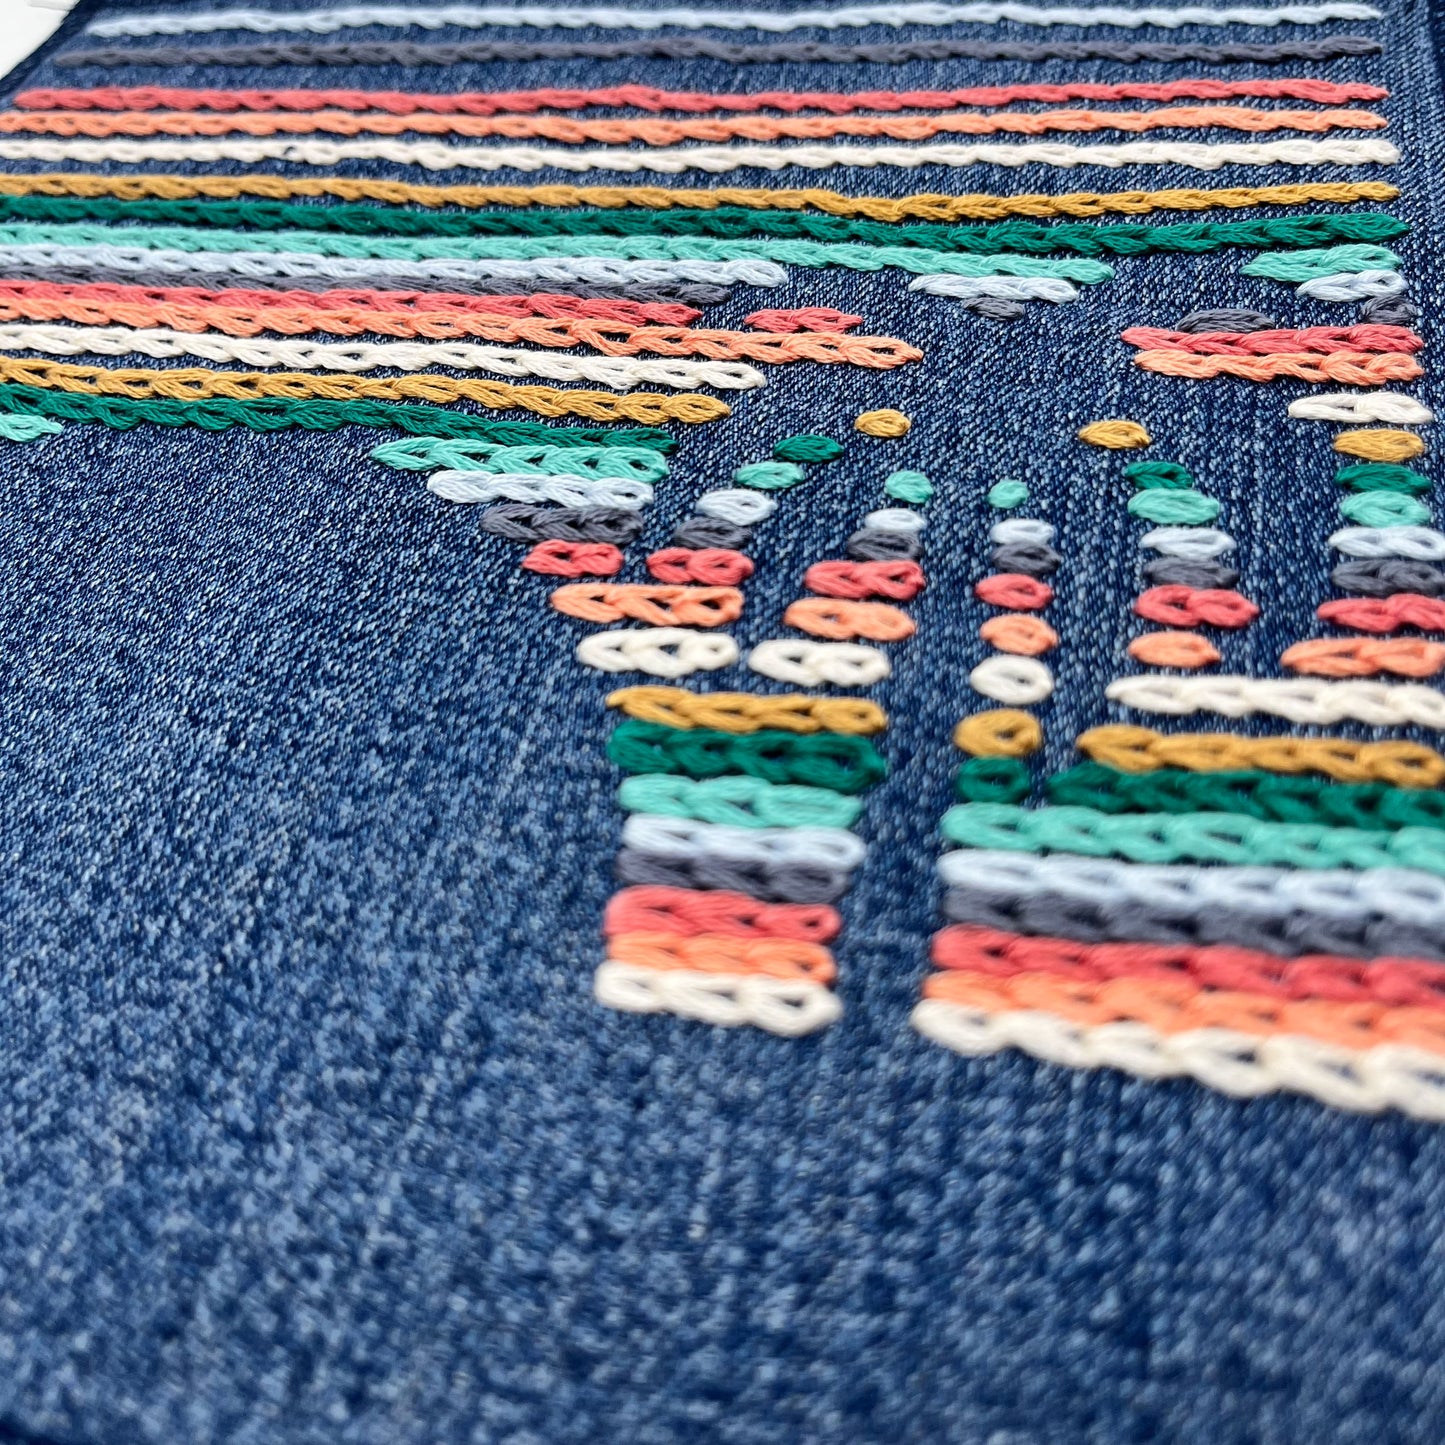 a close up angled view of a large square denim patch, hand stitched with rows of chainstitch, with negative space showing the shapes of a palm tree next to a setting sun, with peach, coral, grey, light blue, seafoam green and mustard colored thread